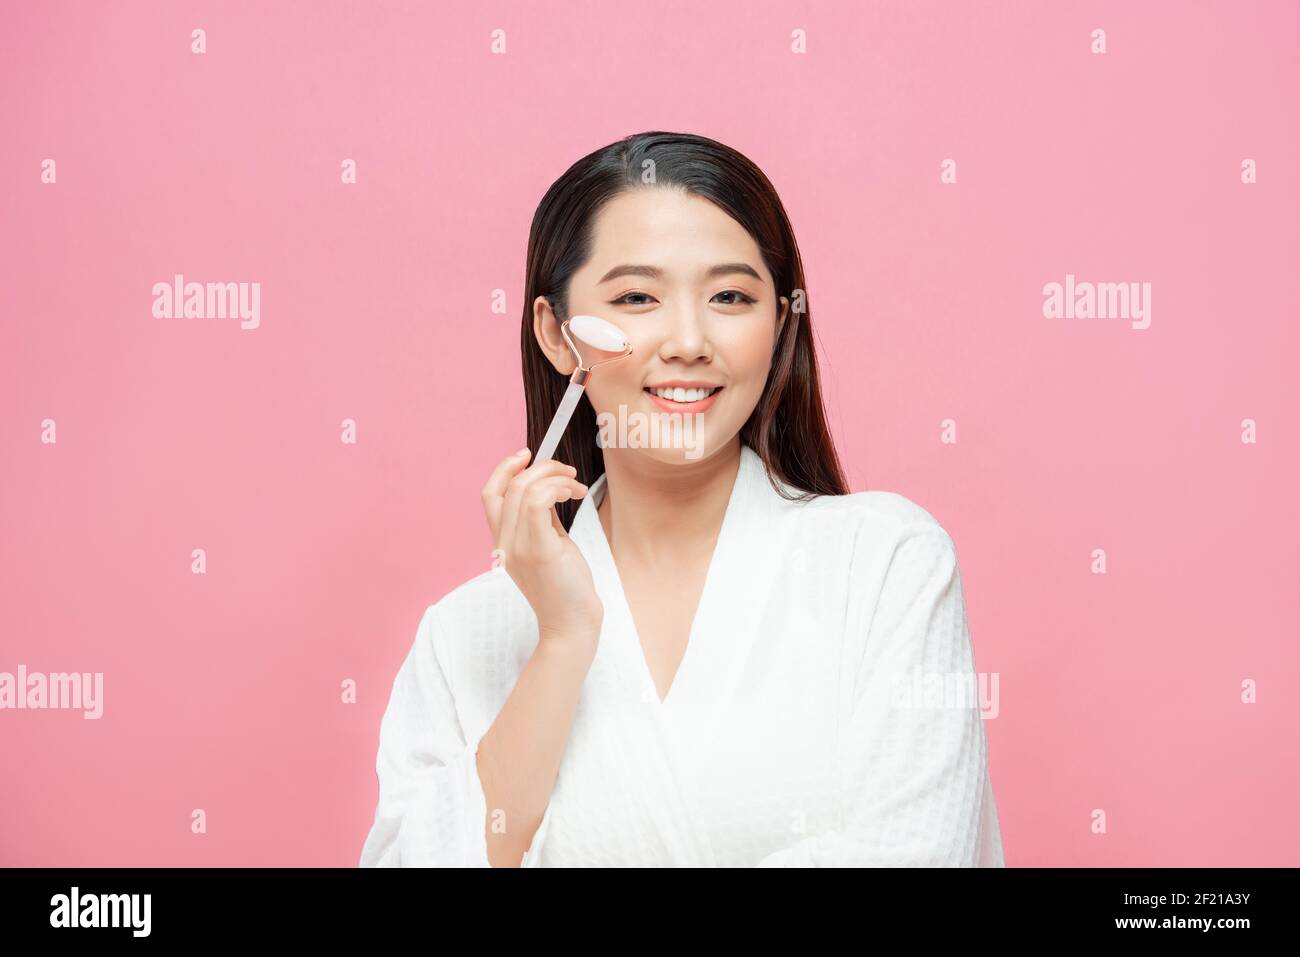 Beauty face care. Woman doing face massage with rose quartz face roller for spa skin care treatment at home Stock Photo